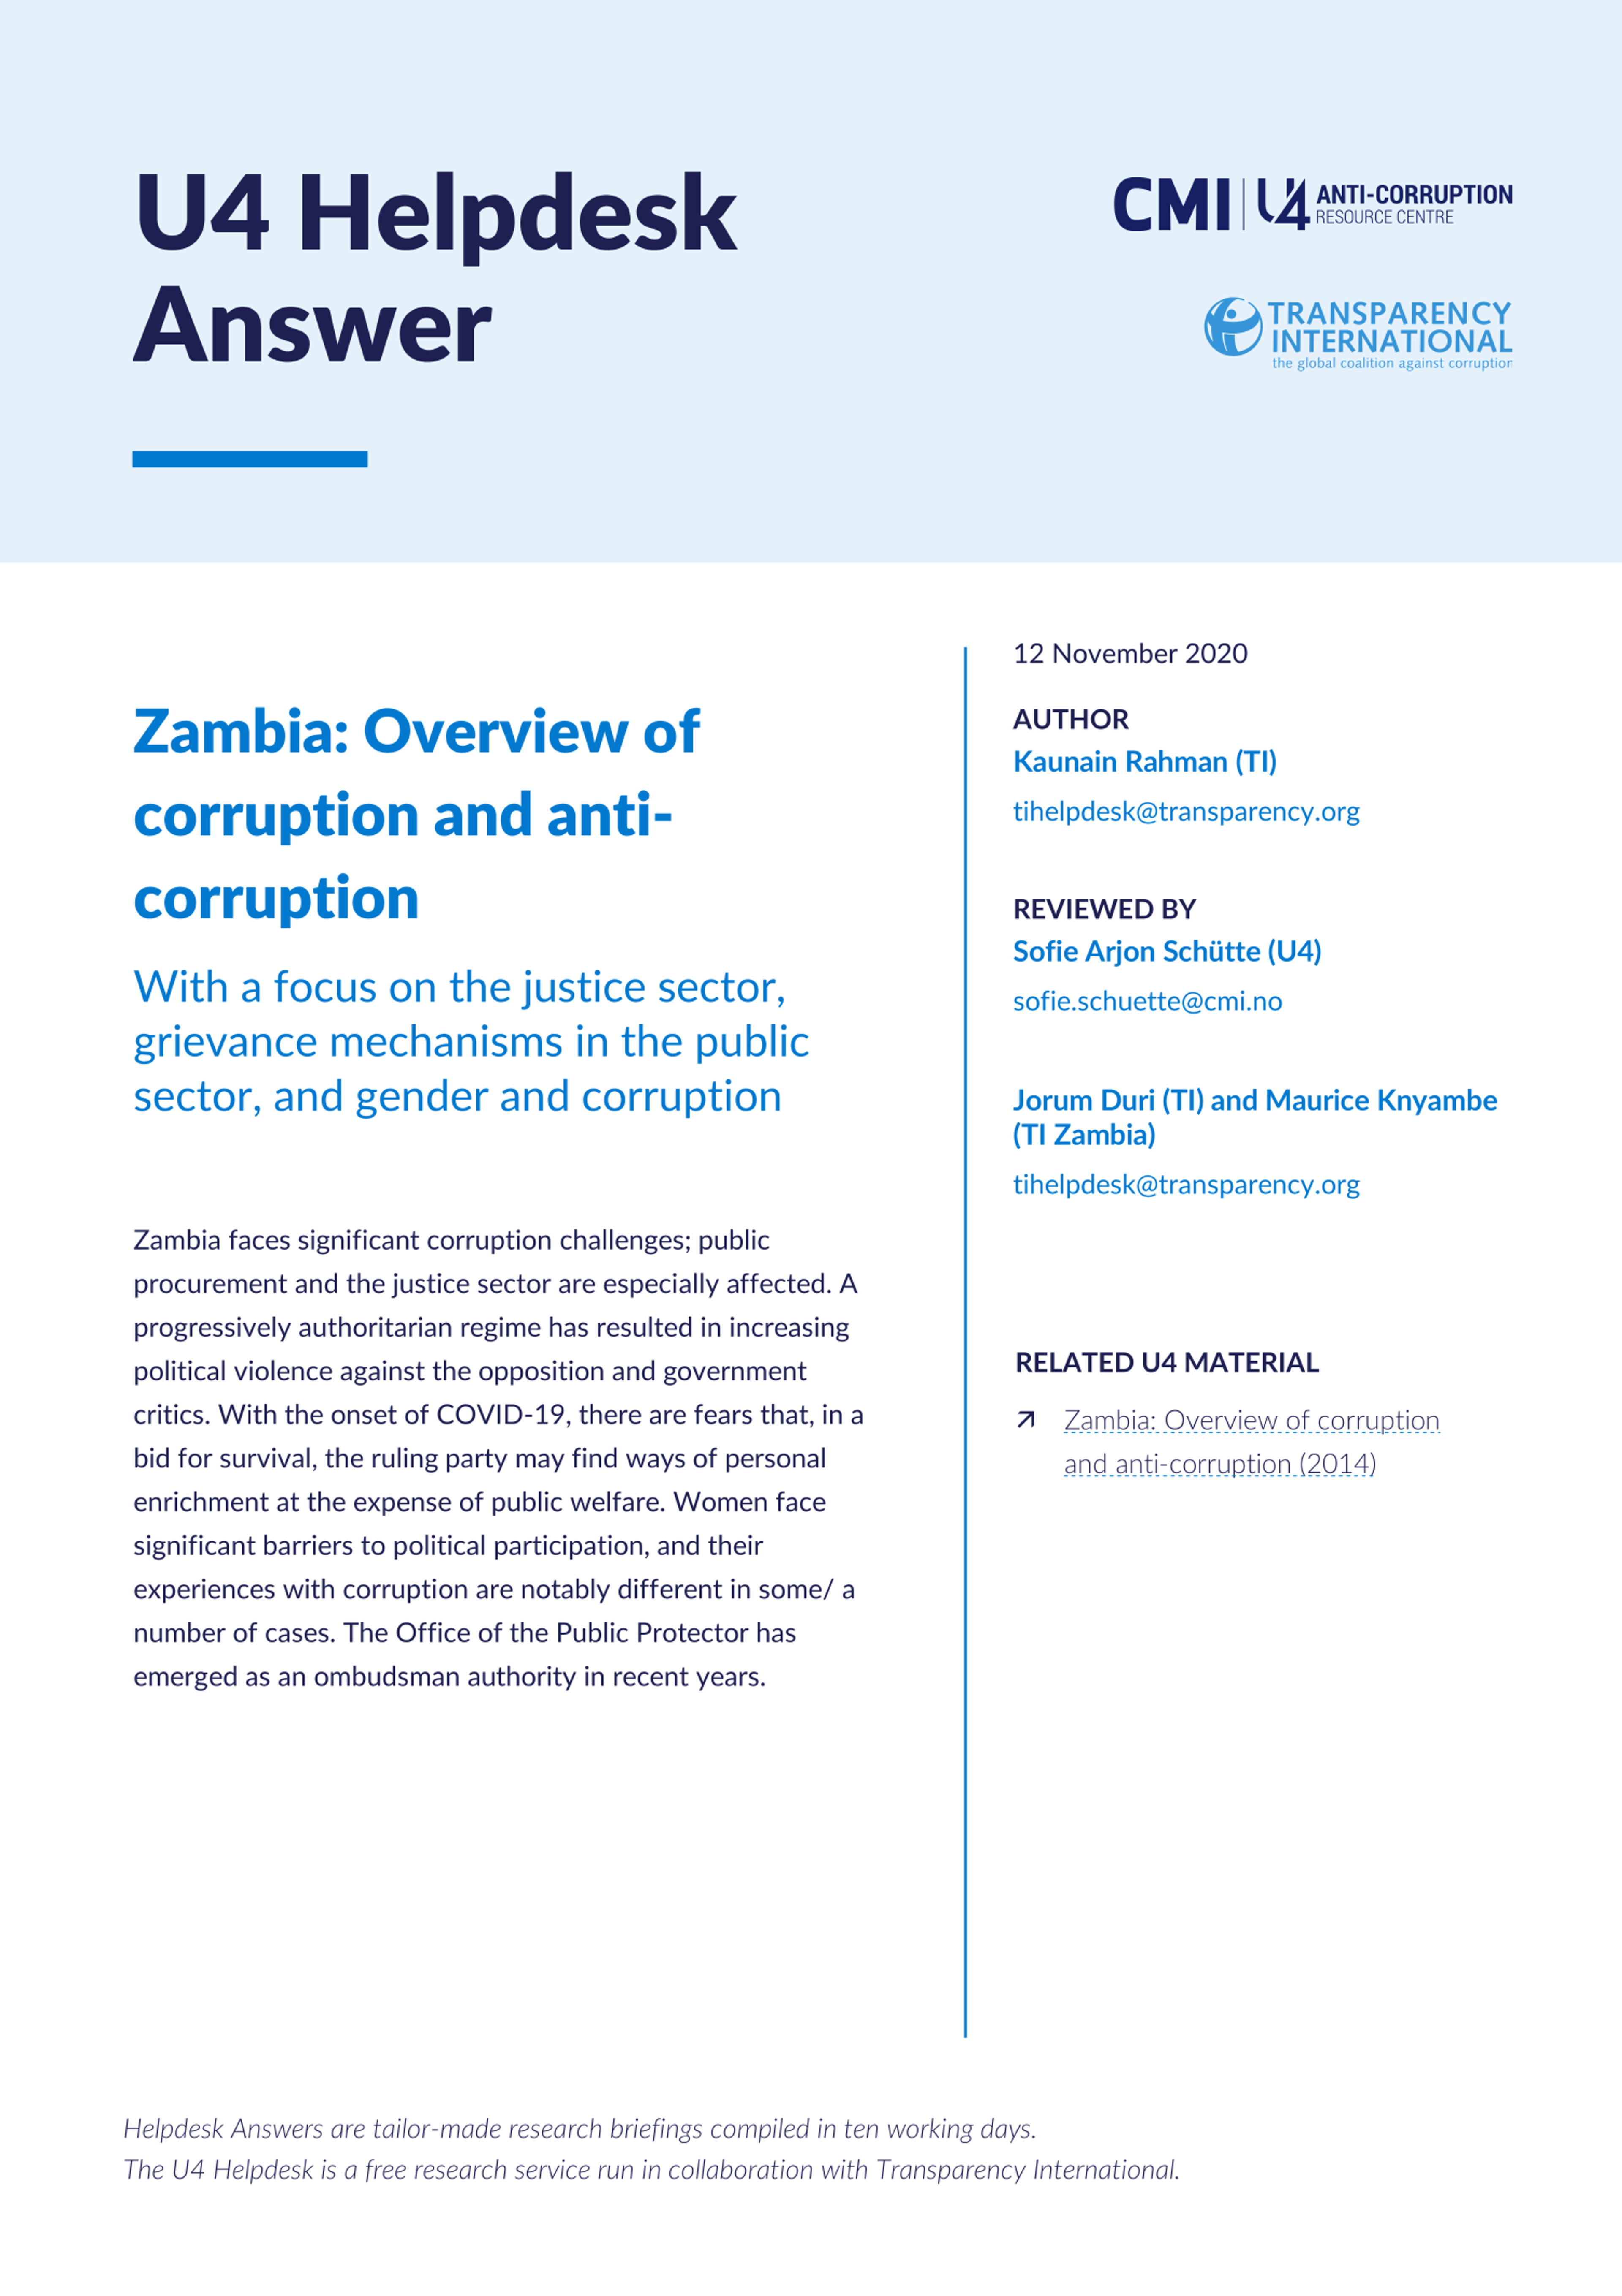 Zambia: Overview of corruption and anti-corruption